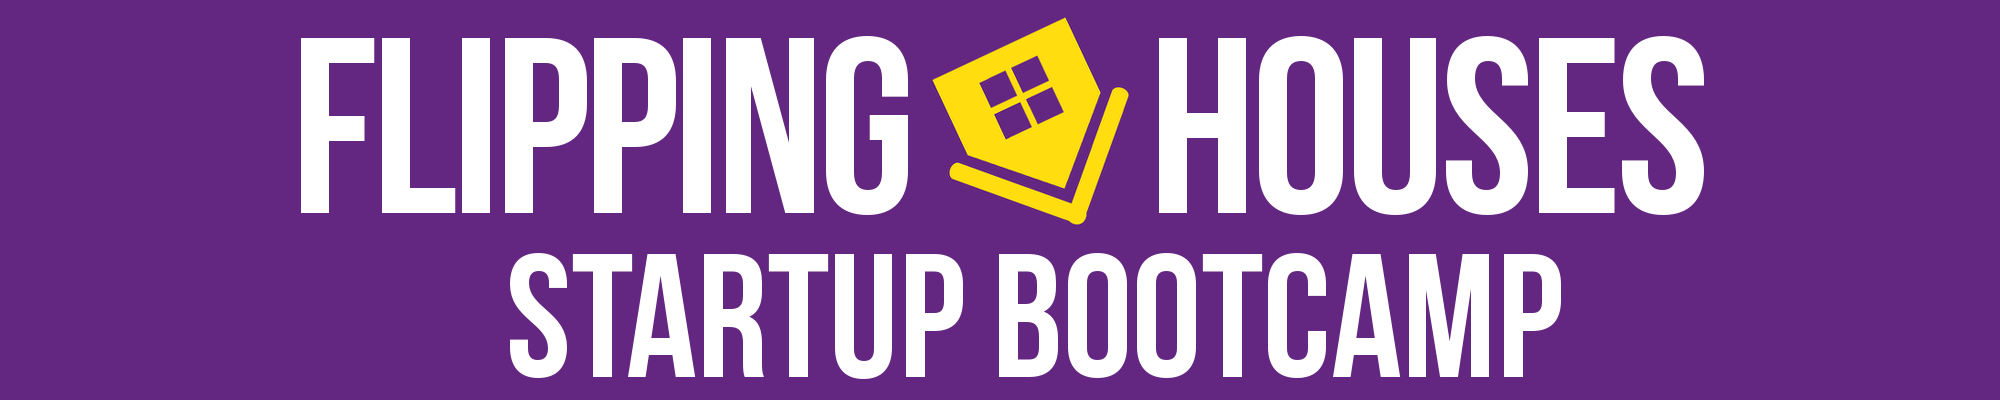 Flipping Houses Startup Bootcamp